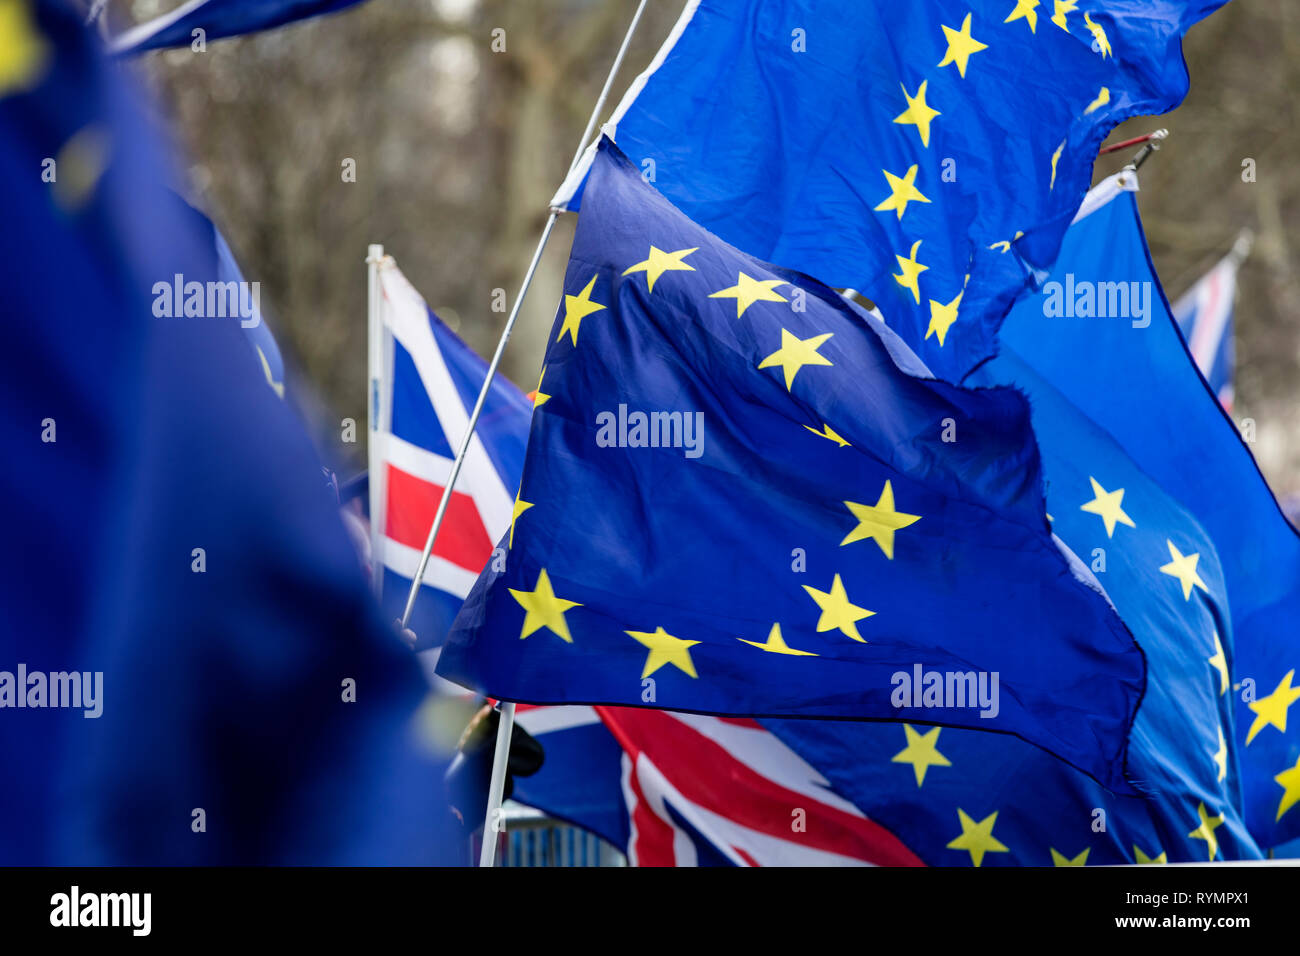 Flags of the European Union flying at a brexit march in London Stock Photo